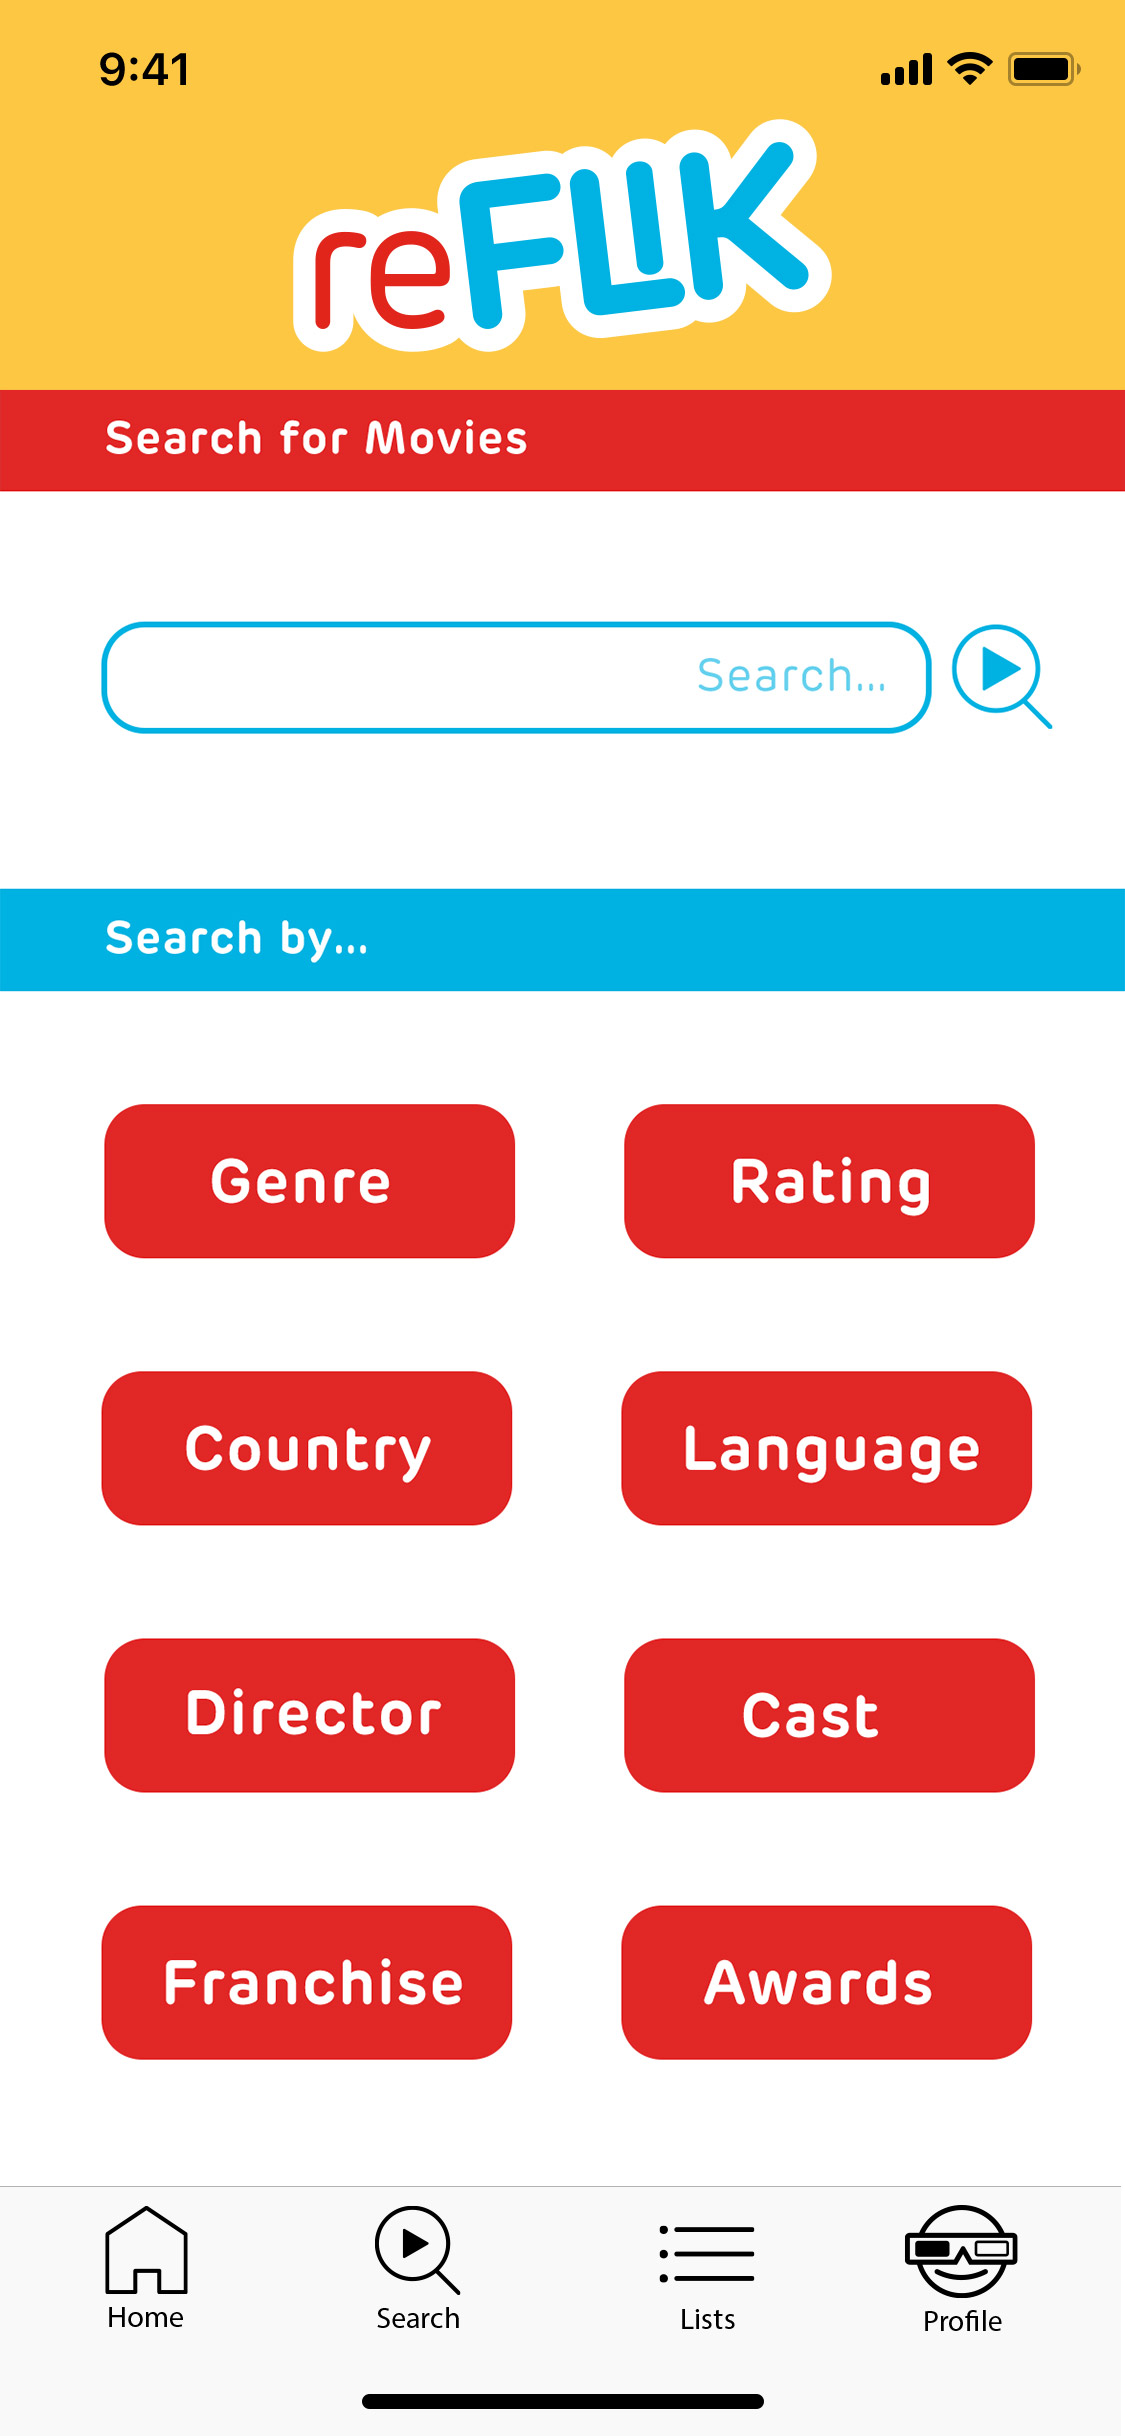 First search page version that includes sorting by genre, rating, country, language, director, cast, and awards